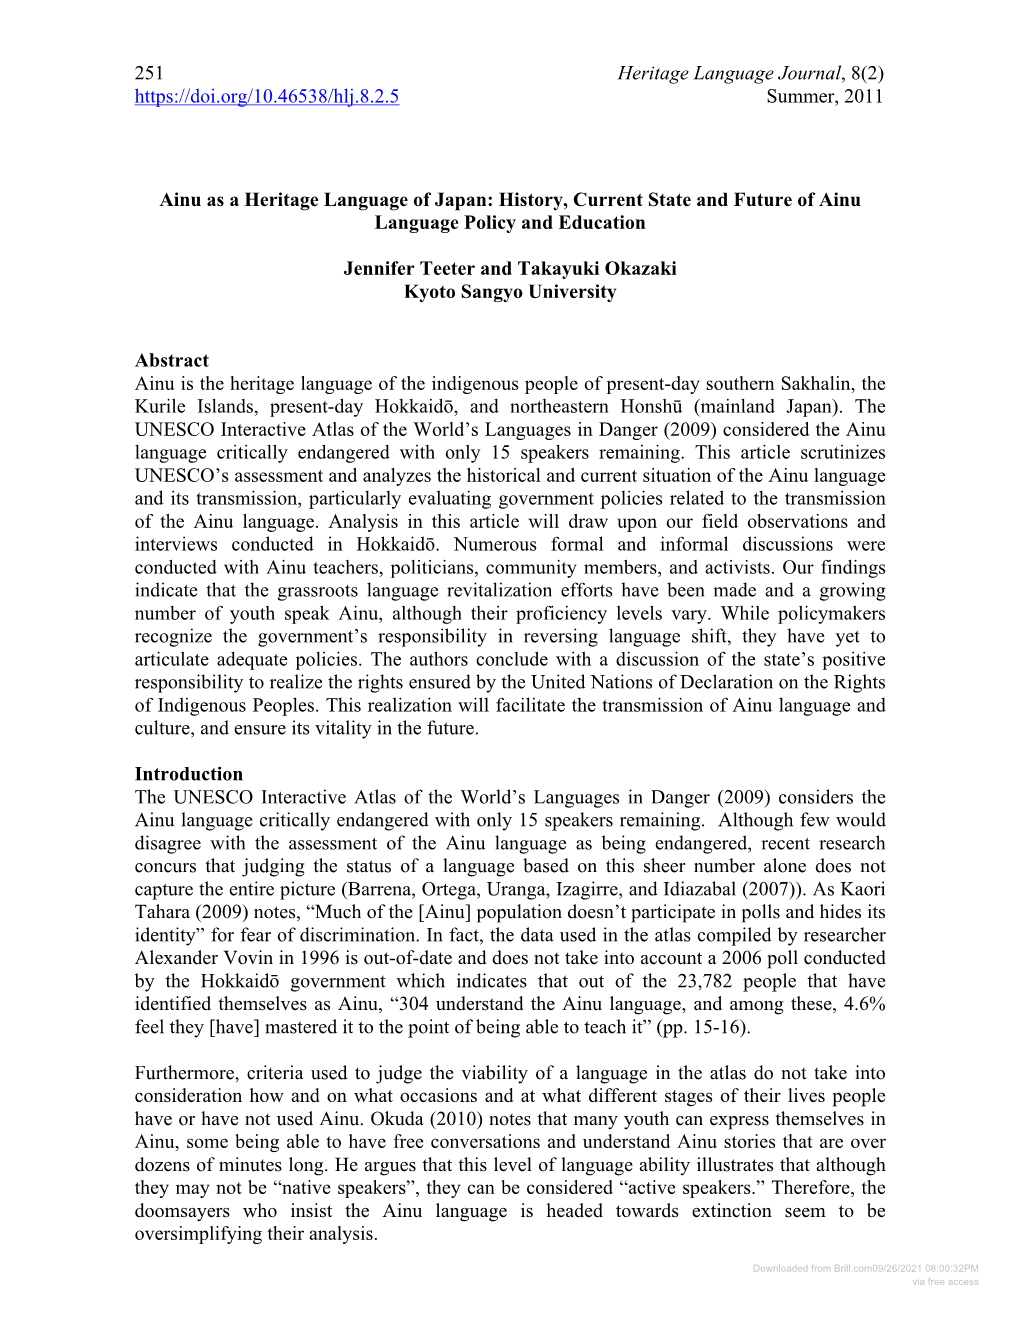 Ainu As a Heritage Language of Japan: History, Current State and Future of Ainu Language Policy and Education